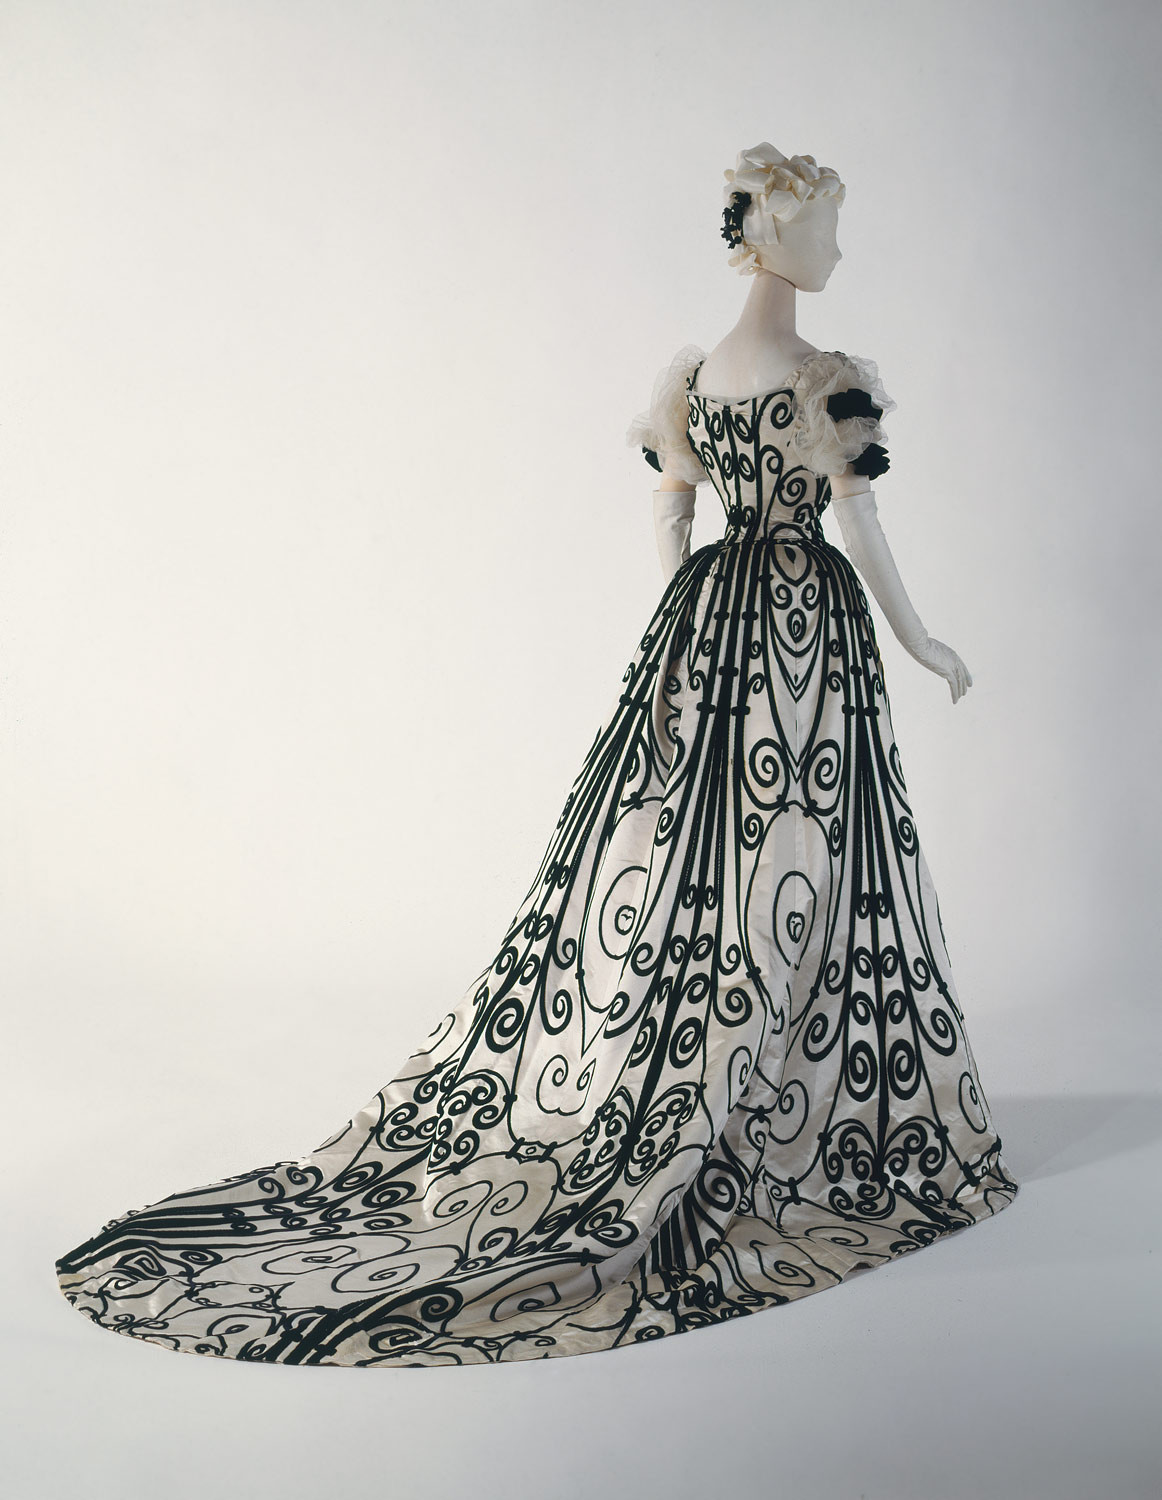 1900 Ball gown. French. House of Worth. Silk. metmuseum